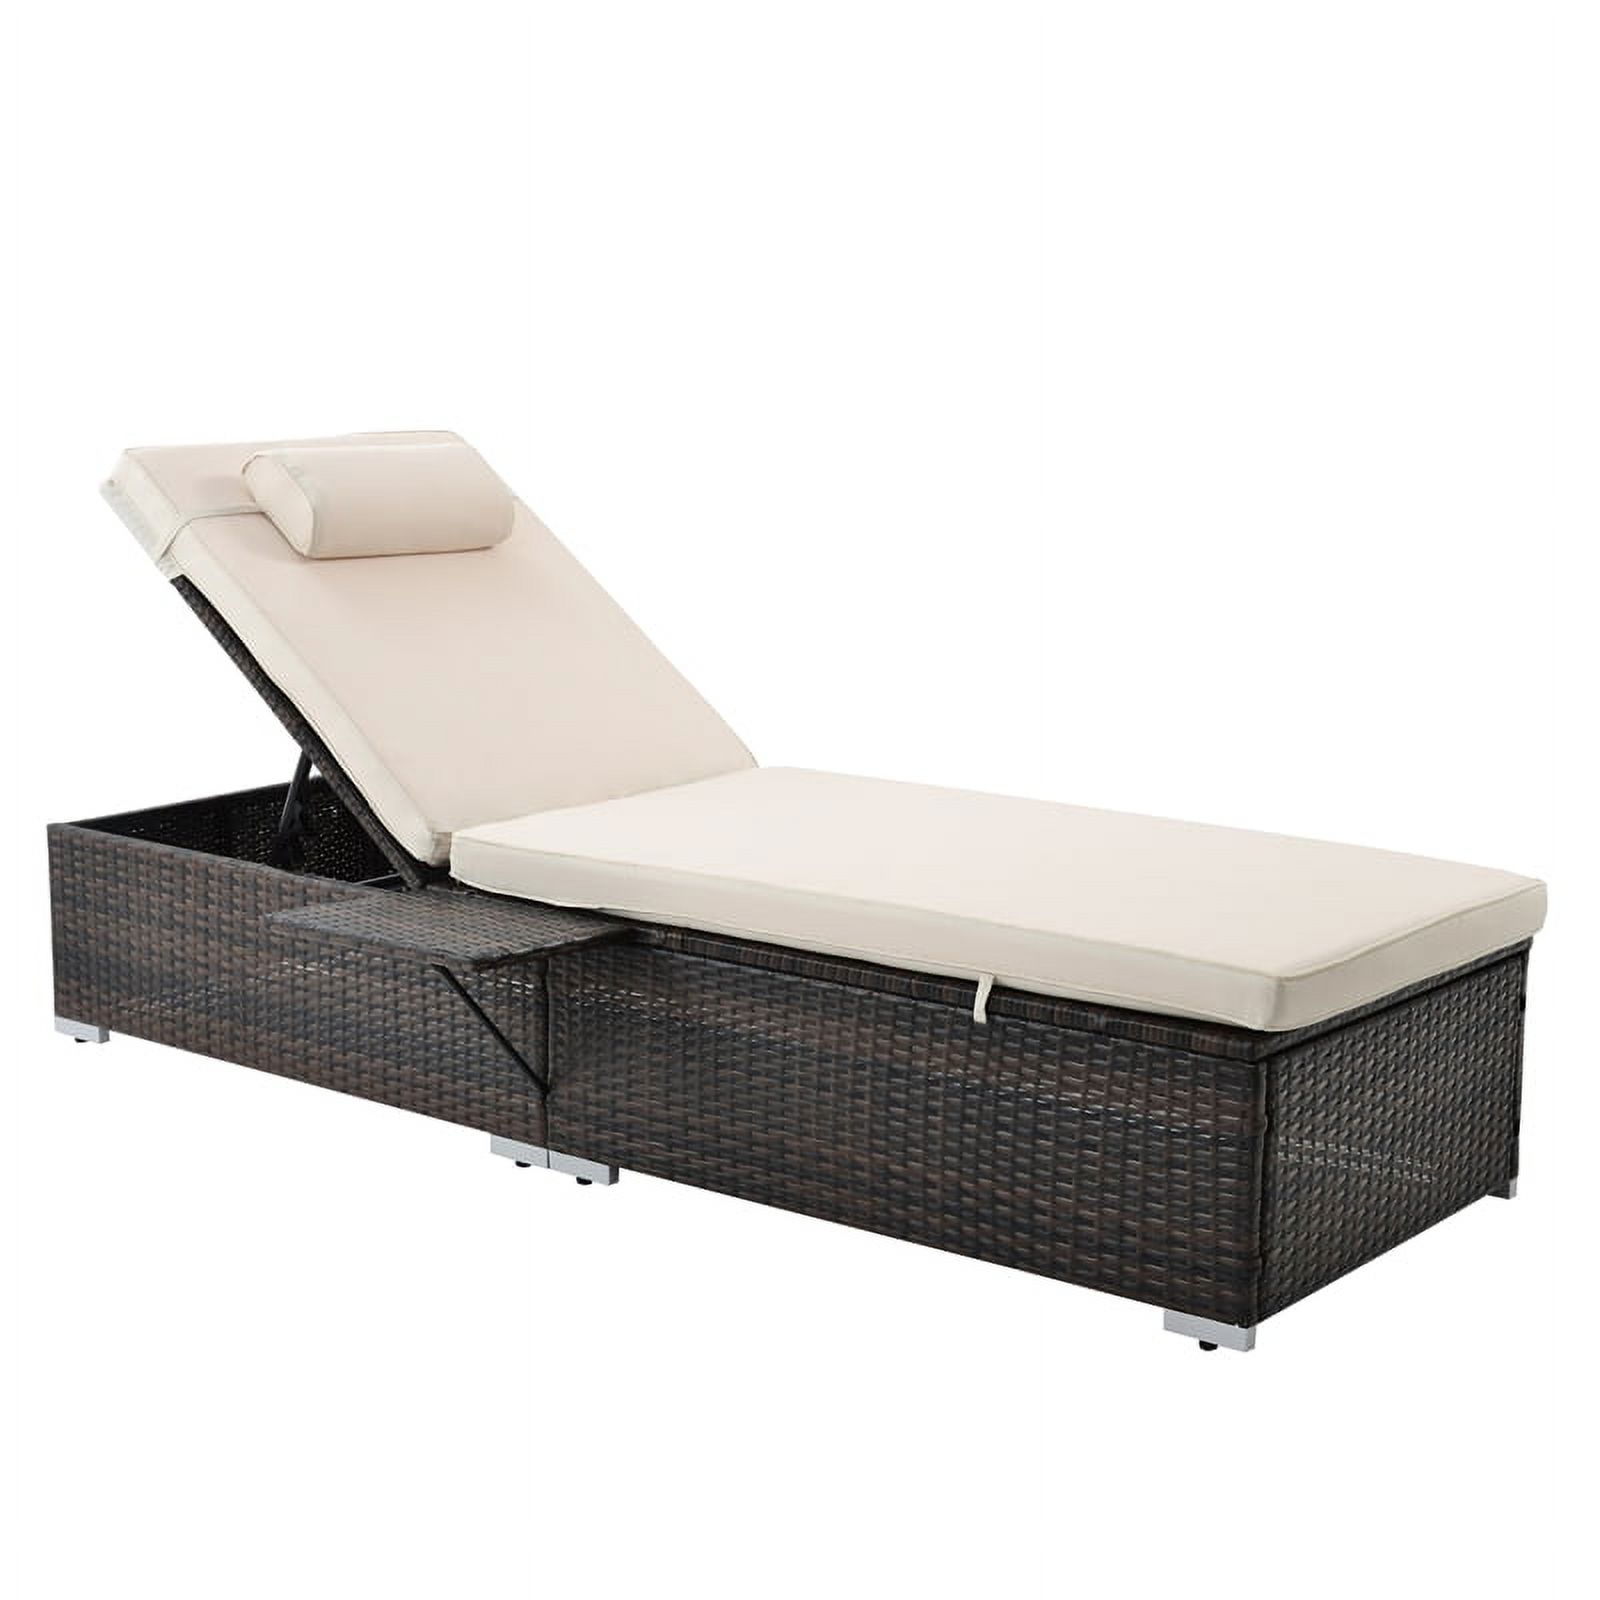 CRO Decor Outdoor PE Wicker Chaise Lounge 2pc with Side Table and Head Pillow - image 3 of 14